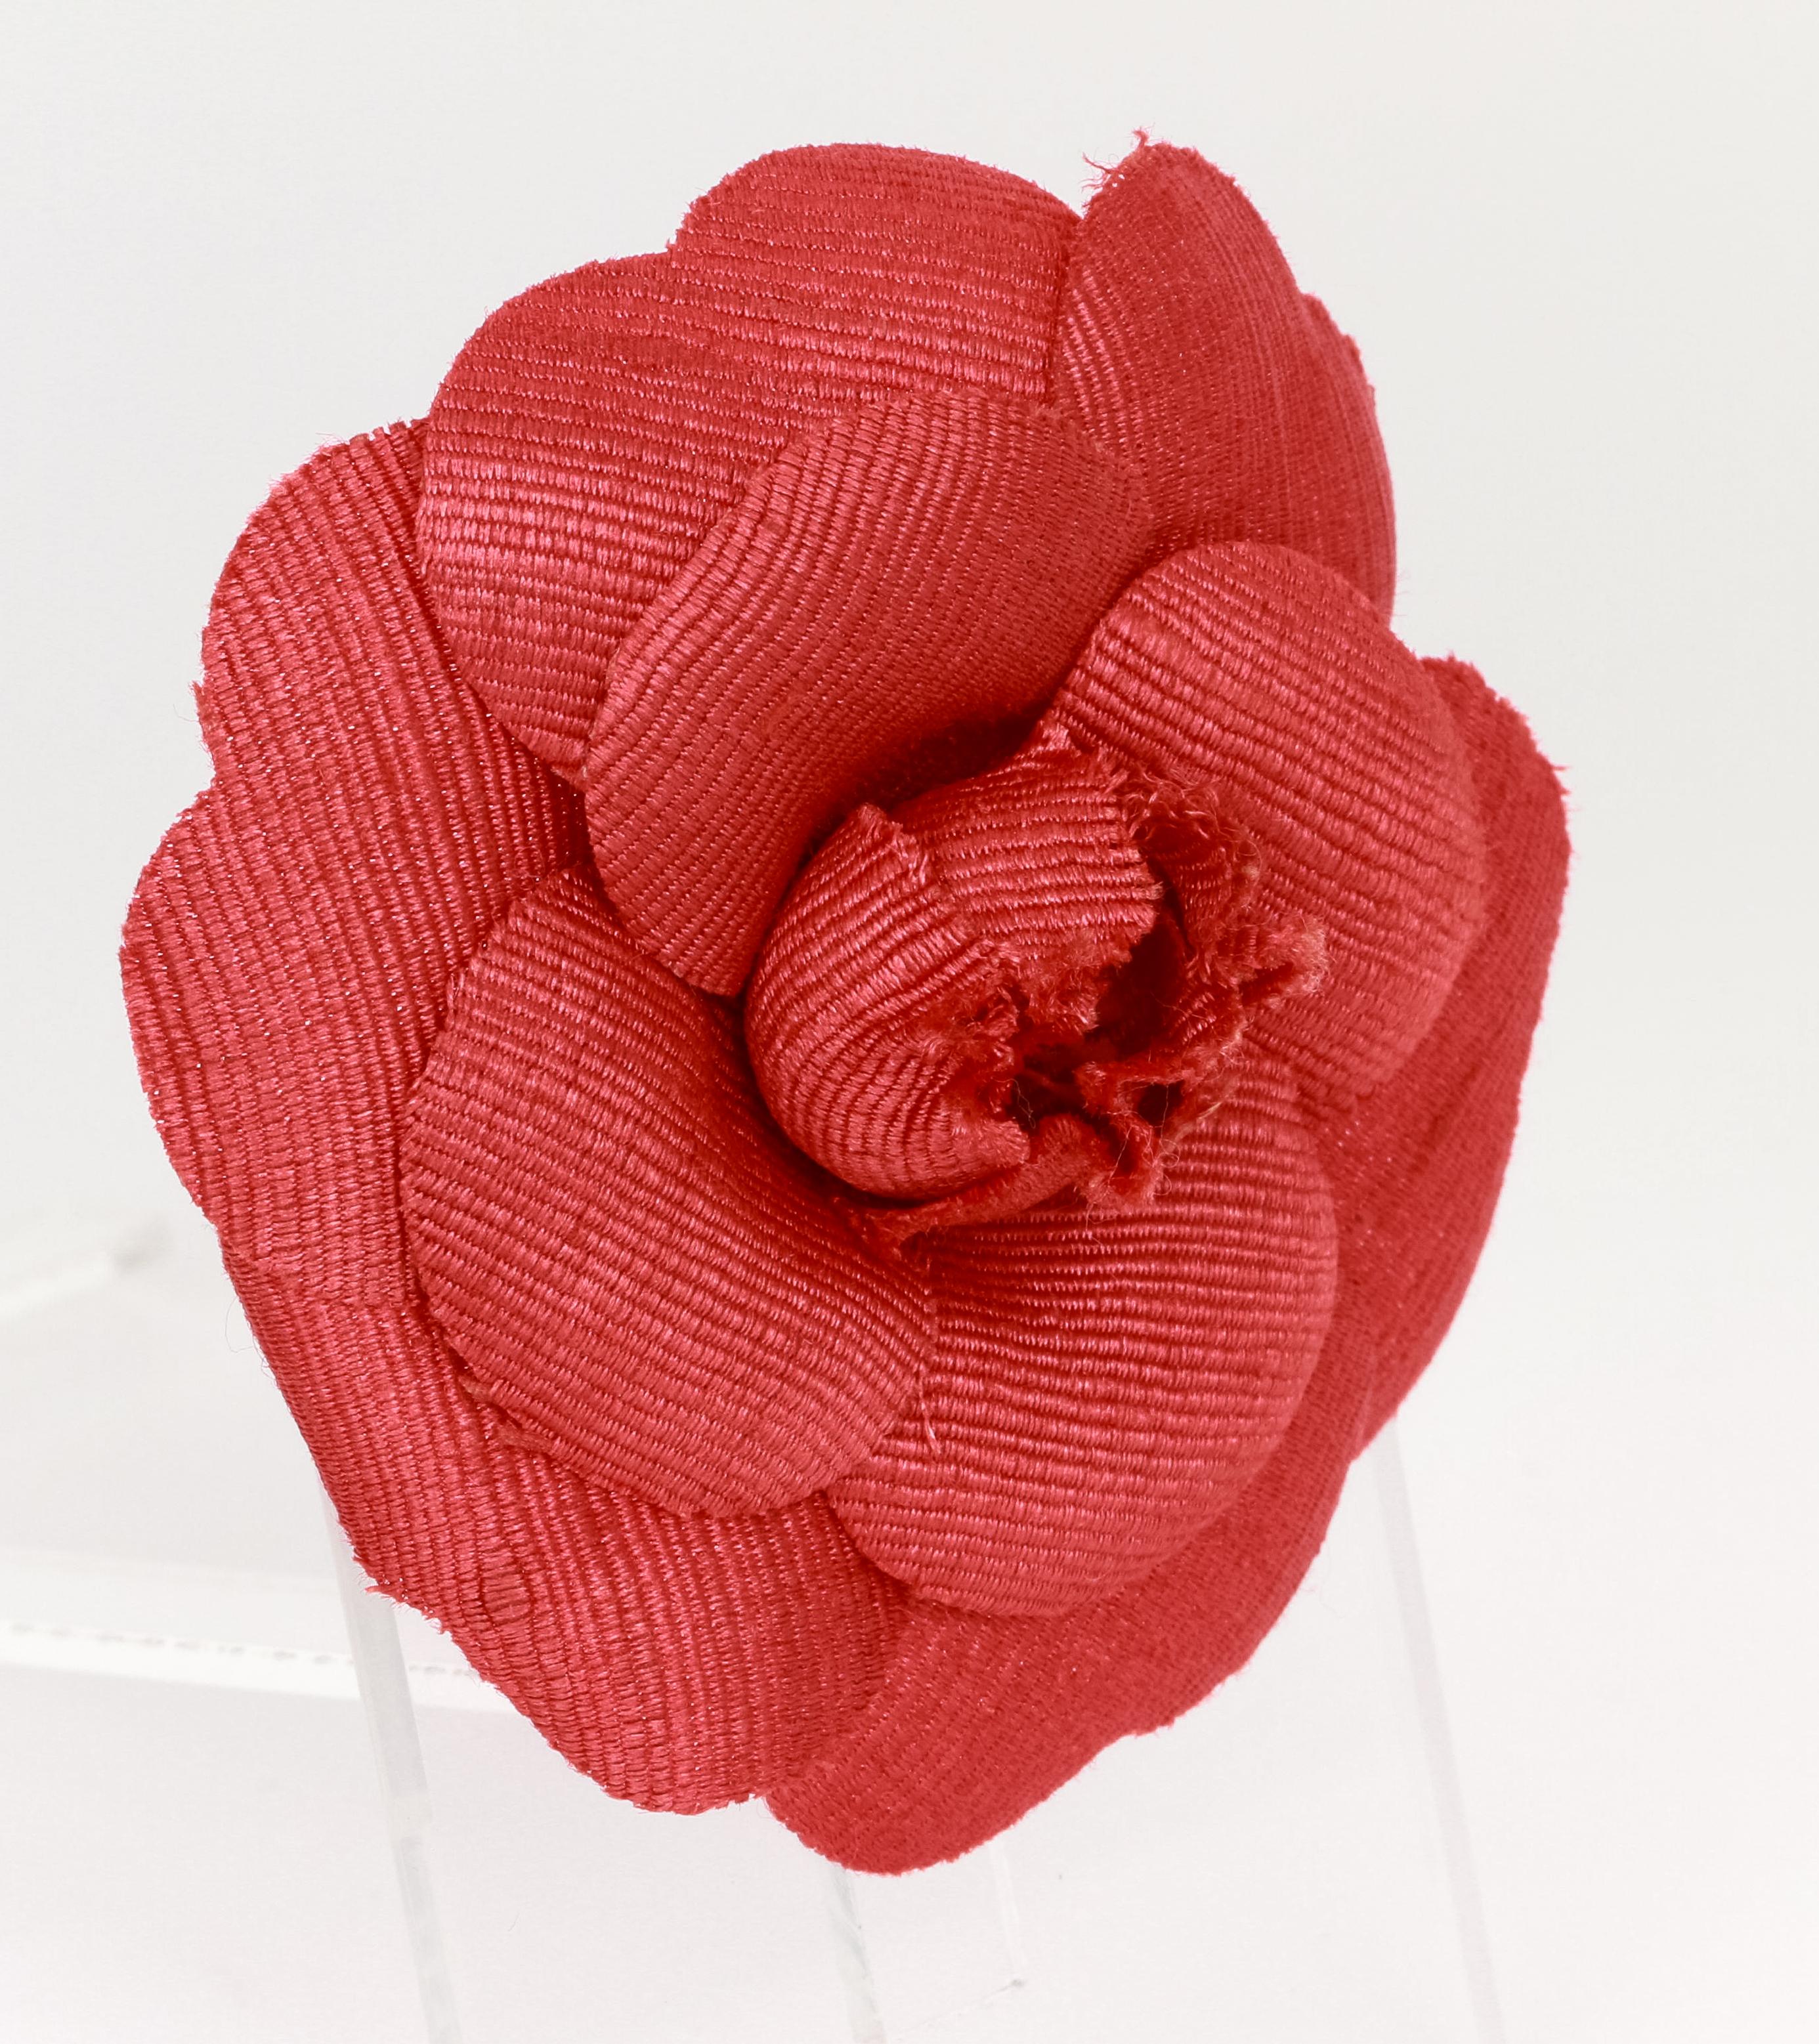 Chanel large red fabric camellia brooch, 3.5